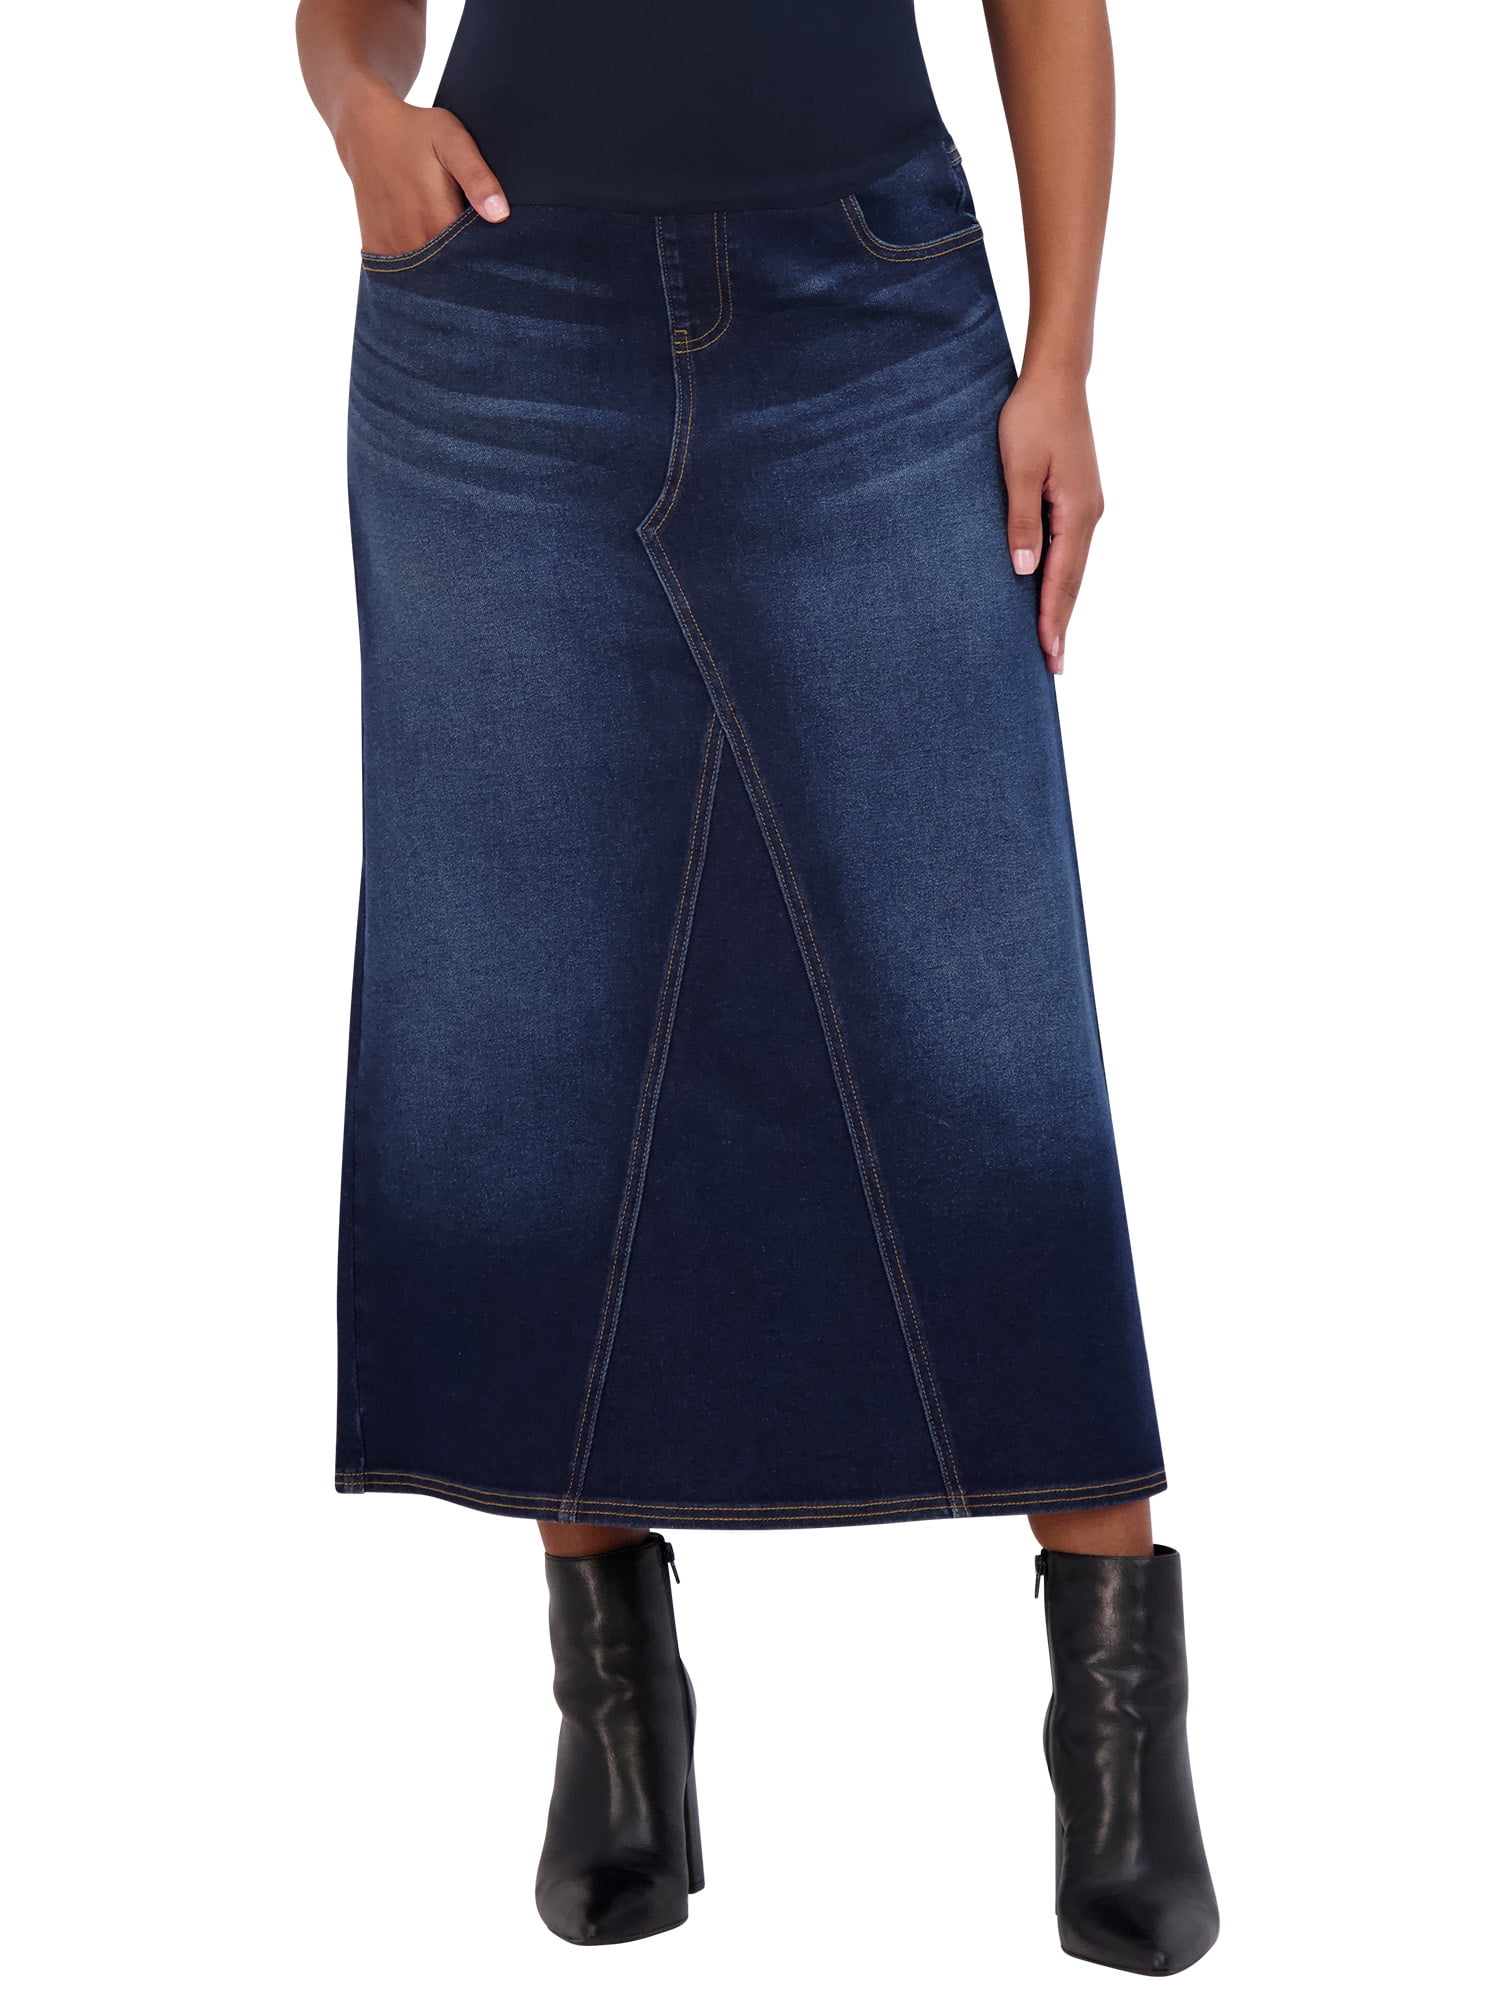 Maternity Pregnant Denim Skirt with Pregnancy Jersey Panel (XS